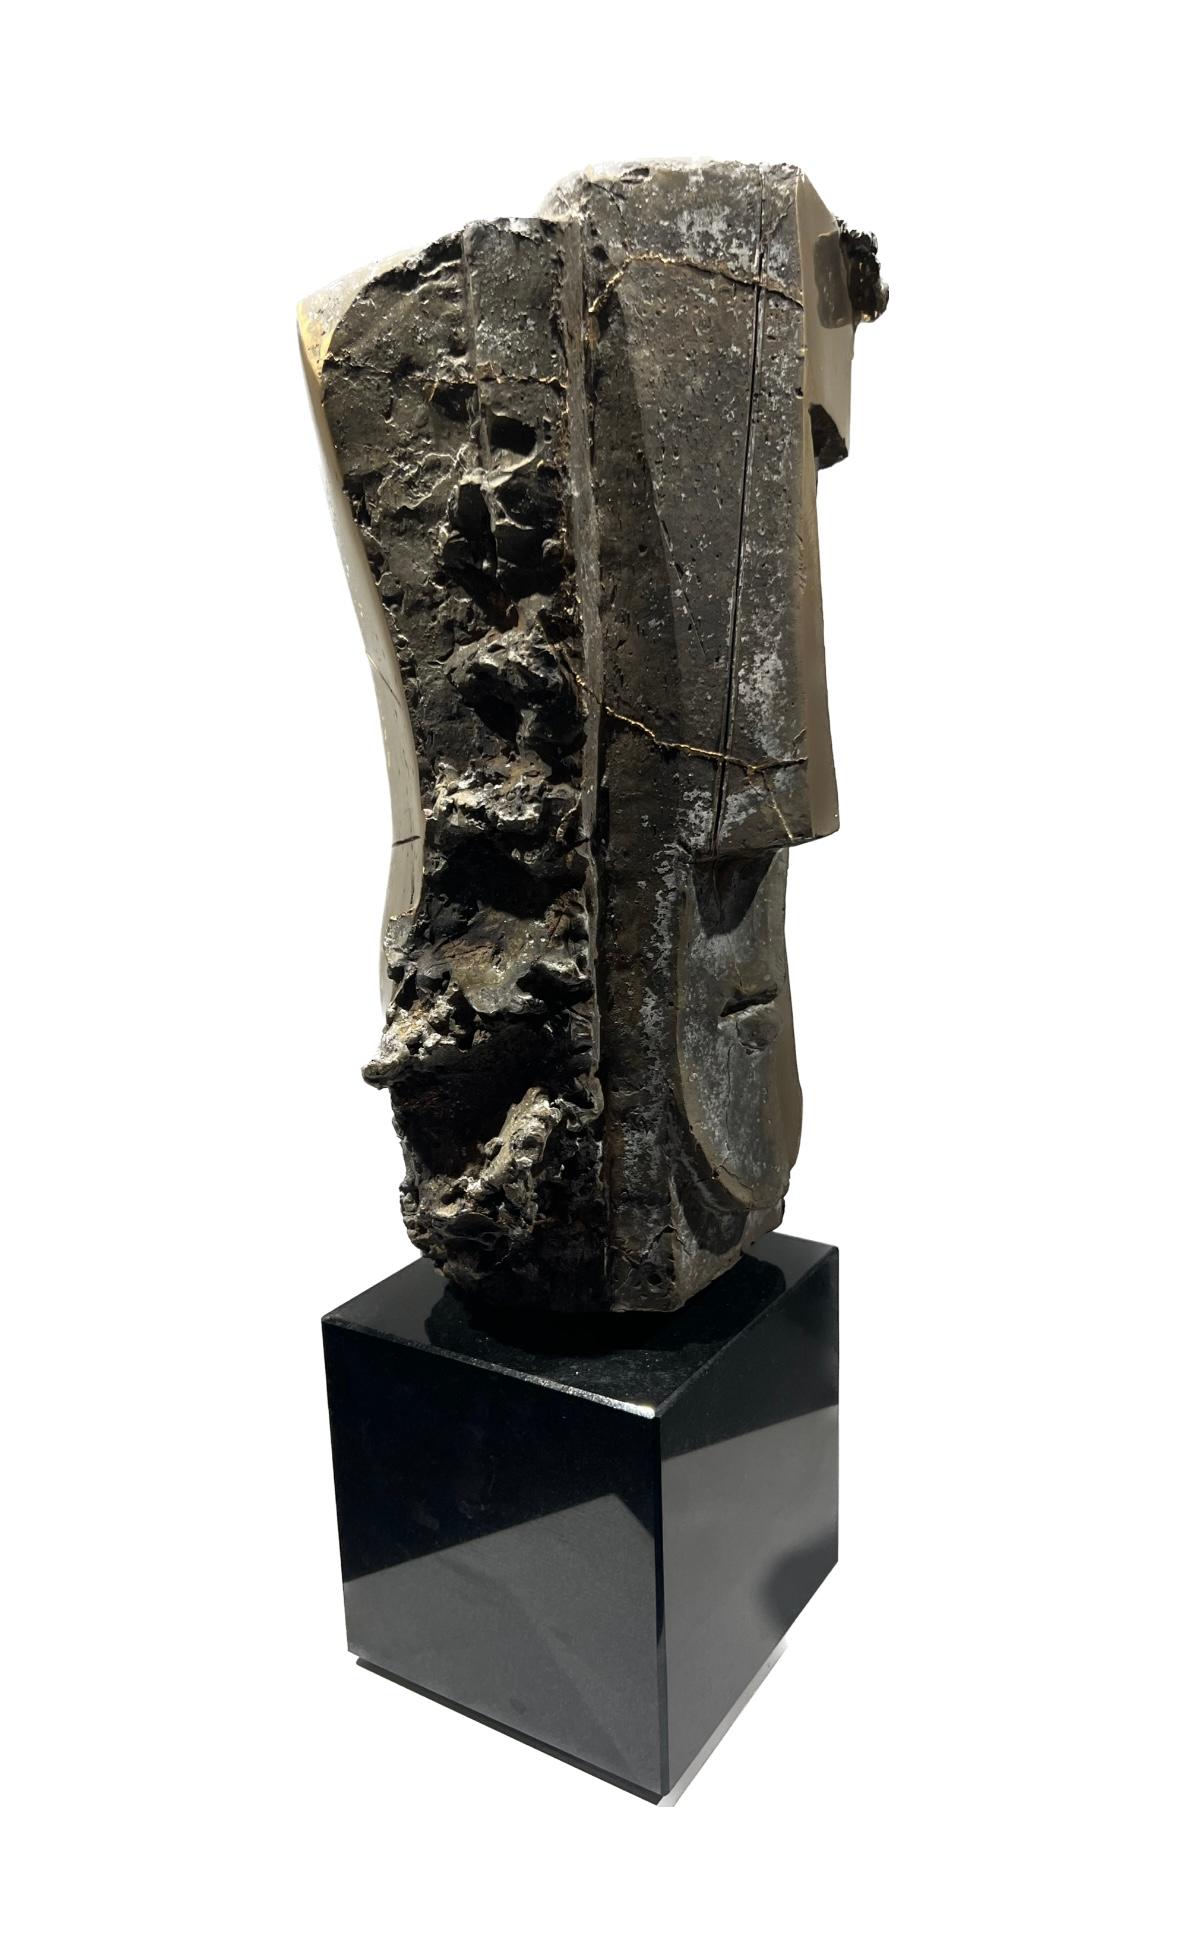 Father ( Casted 2023) Bronze Sculpture Abstract Portrait In Stock. Every Edition of Casting is different, so each sculpture is unique

Junghans (1956, Recklinghausen) creates abstract sculptures in stone, wood and bronze, mostly torsos and primal